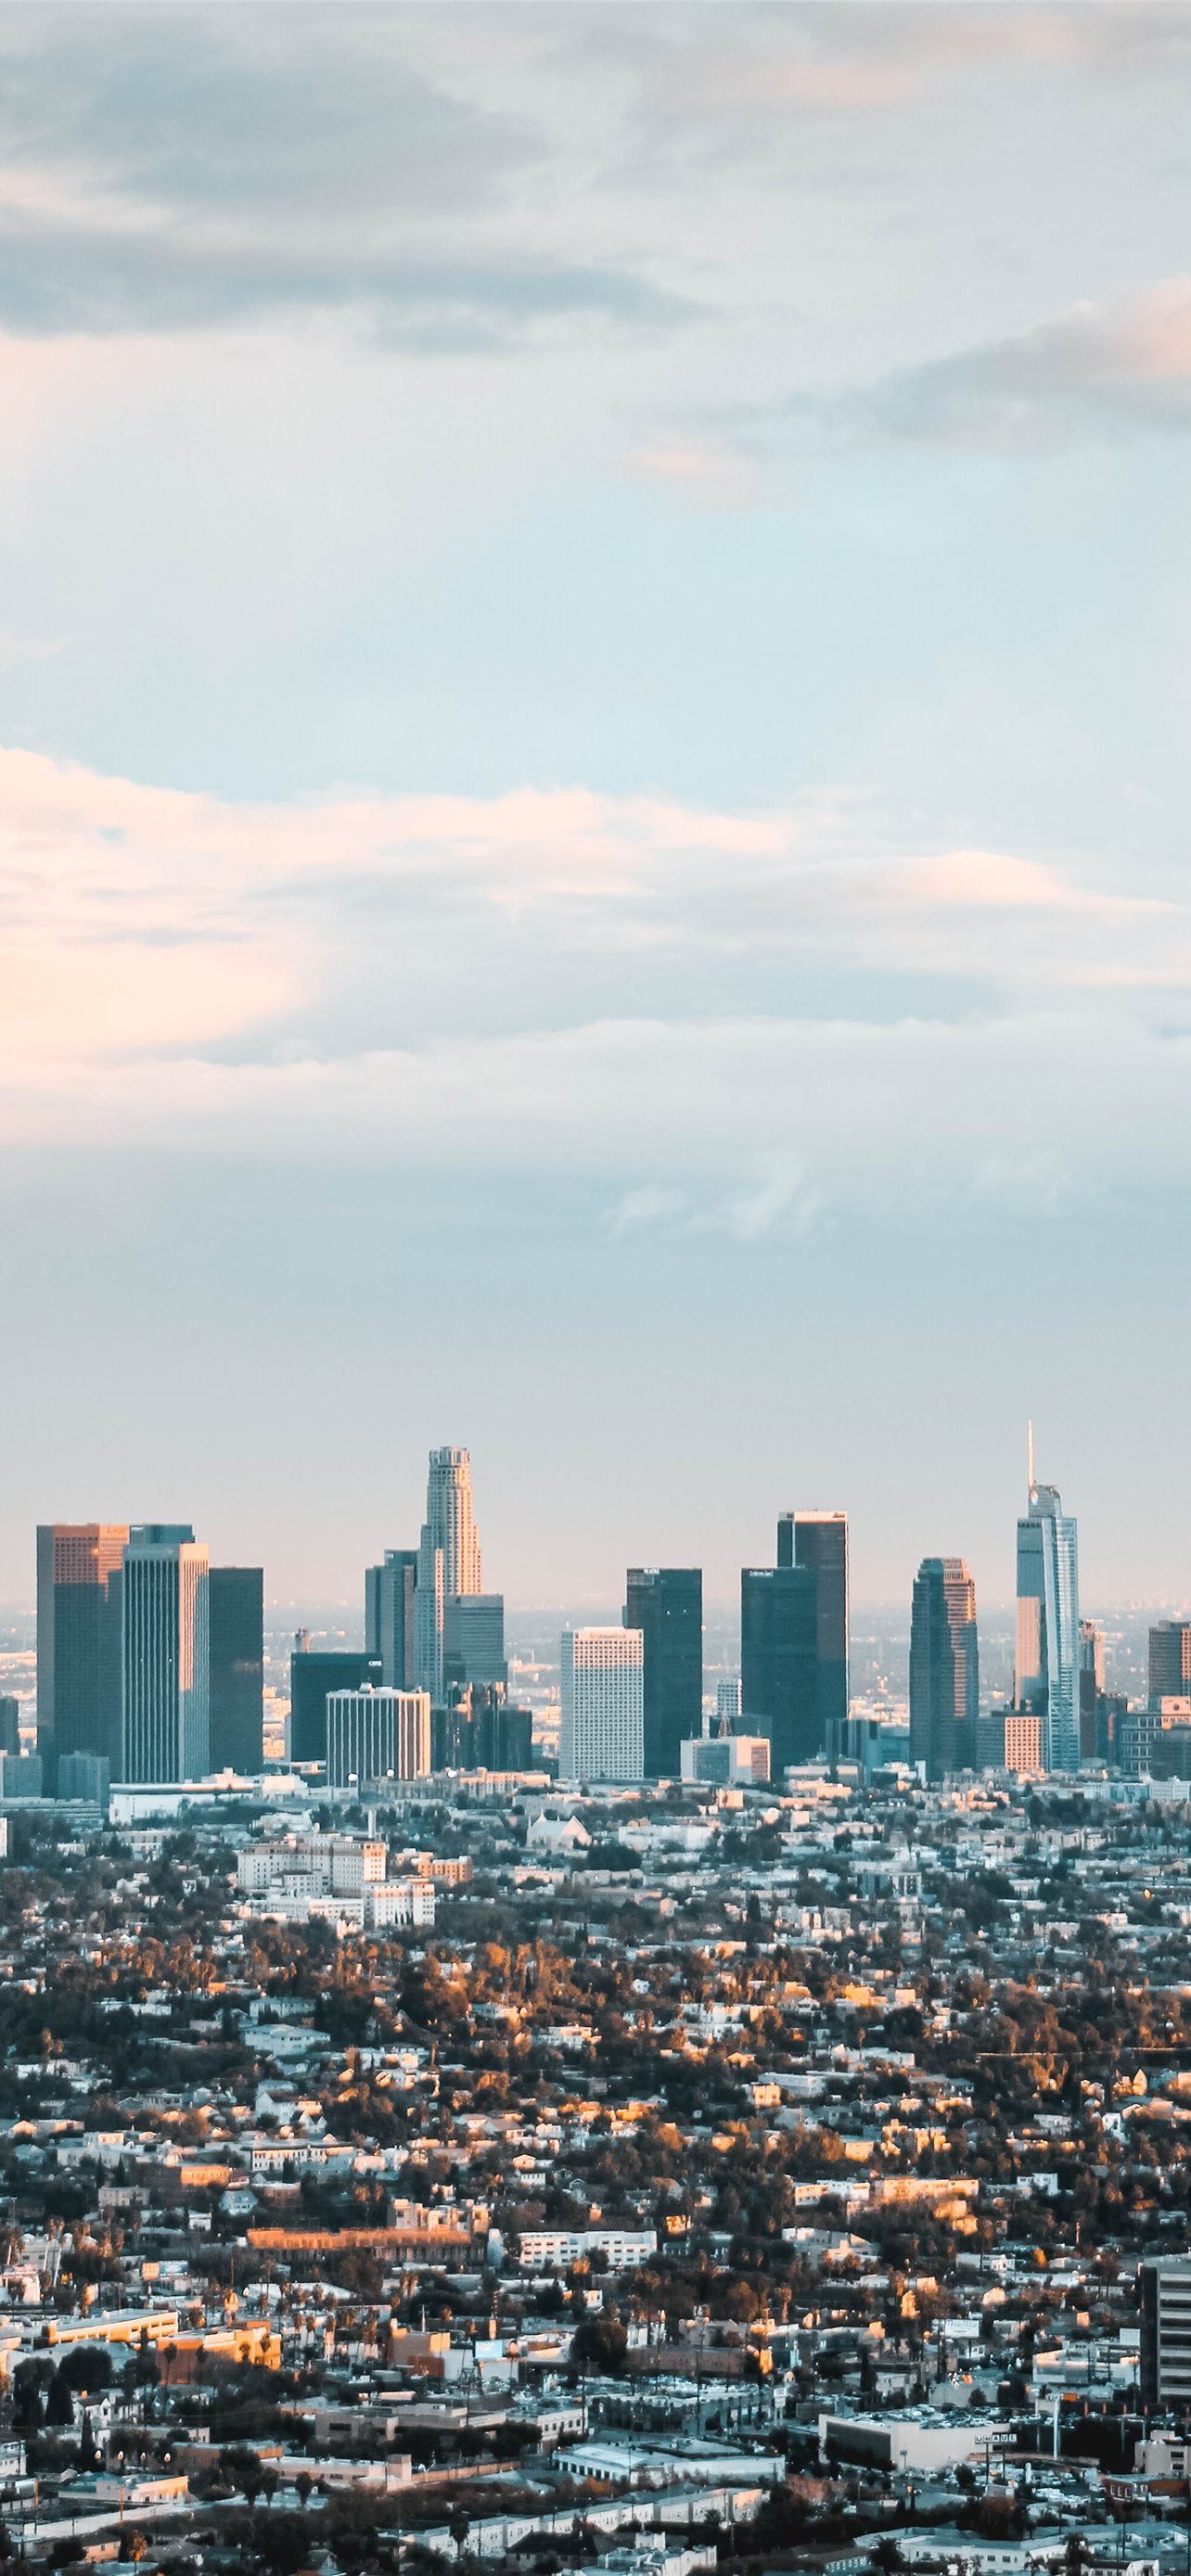 A city skyline with tall buildings and a blue sky - Los Angeles